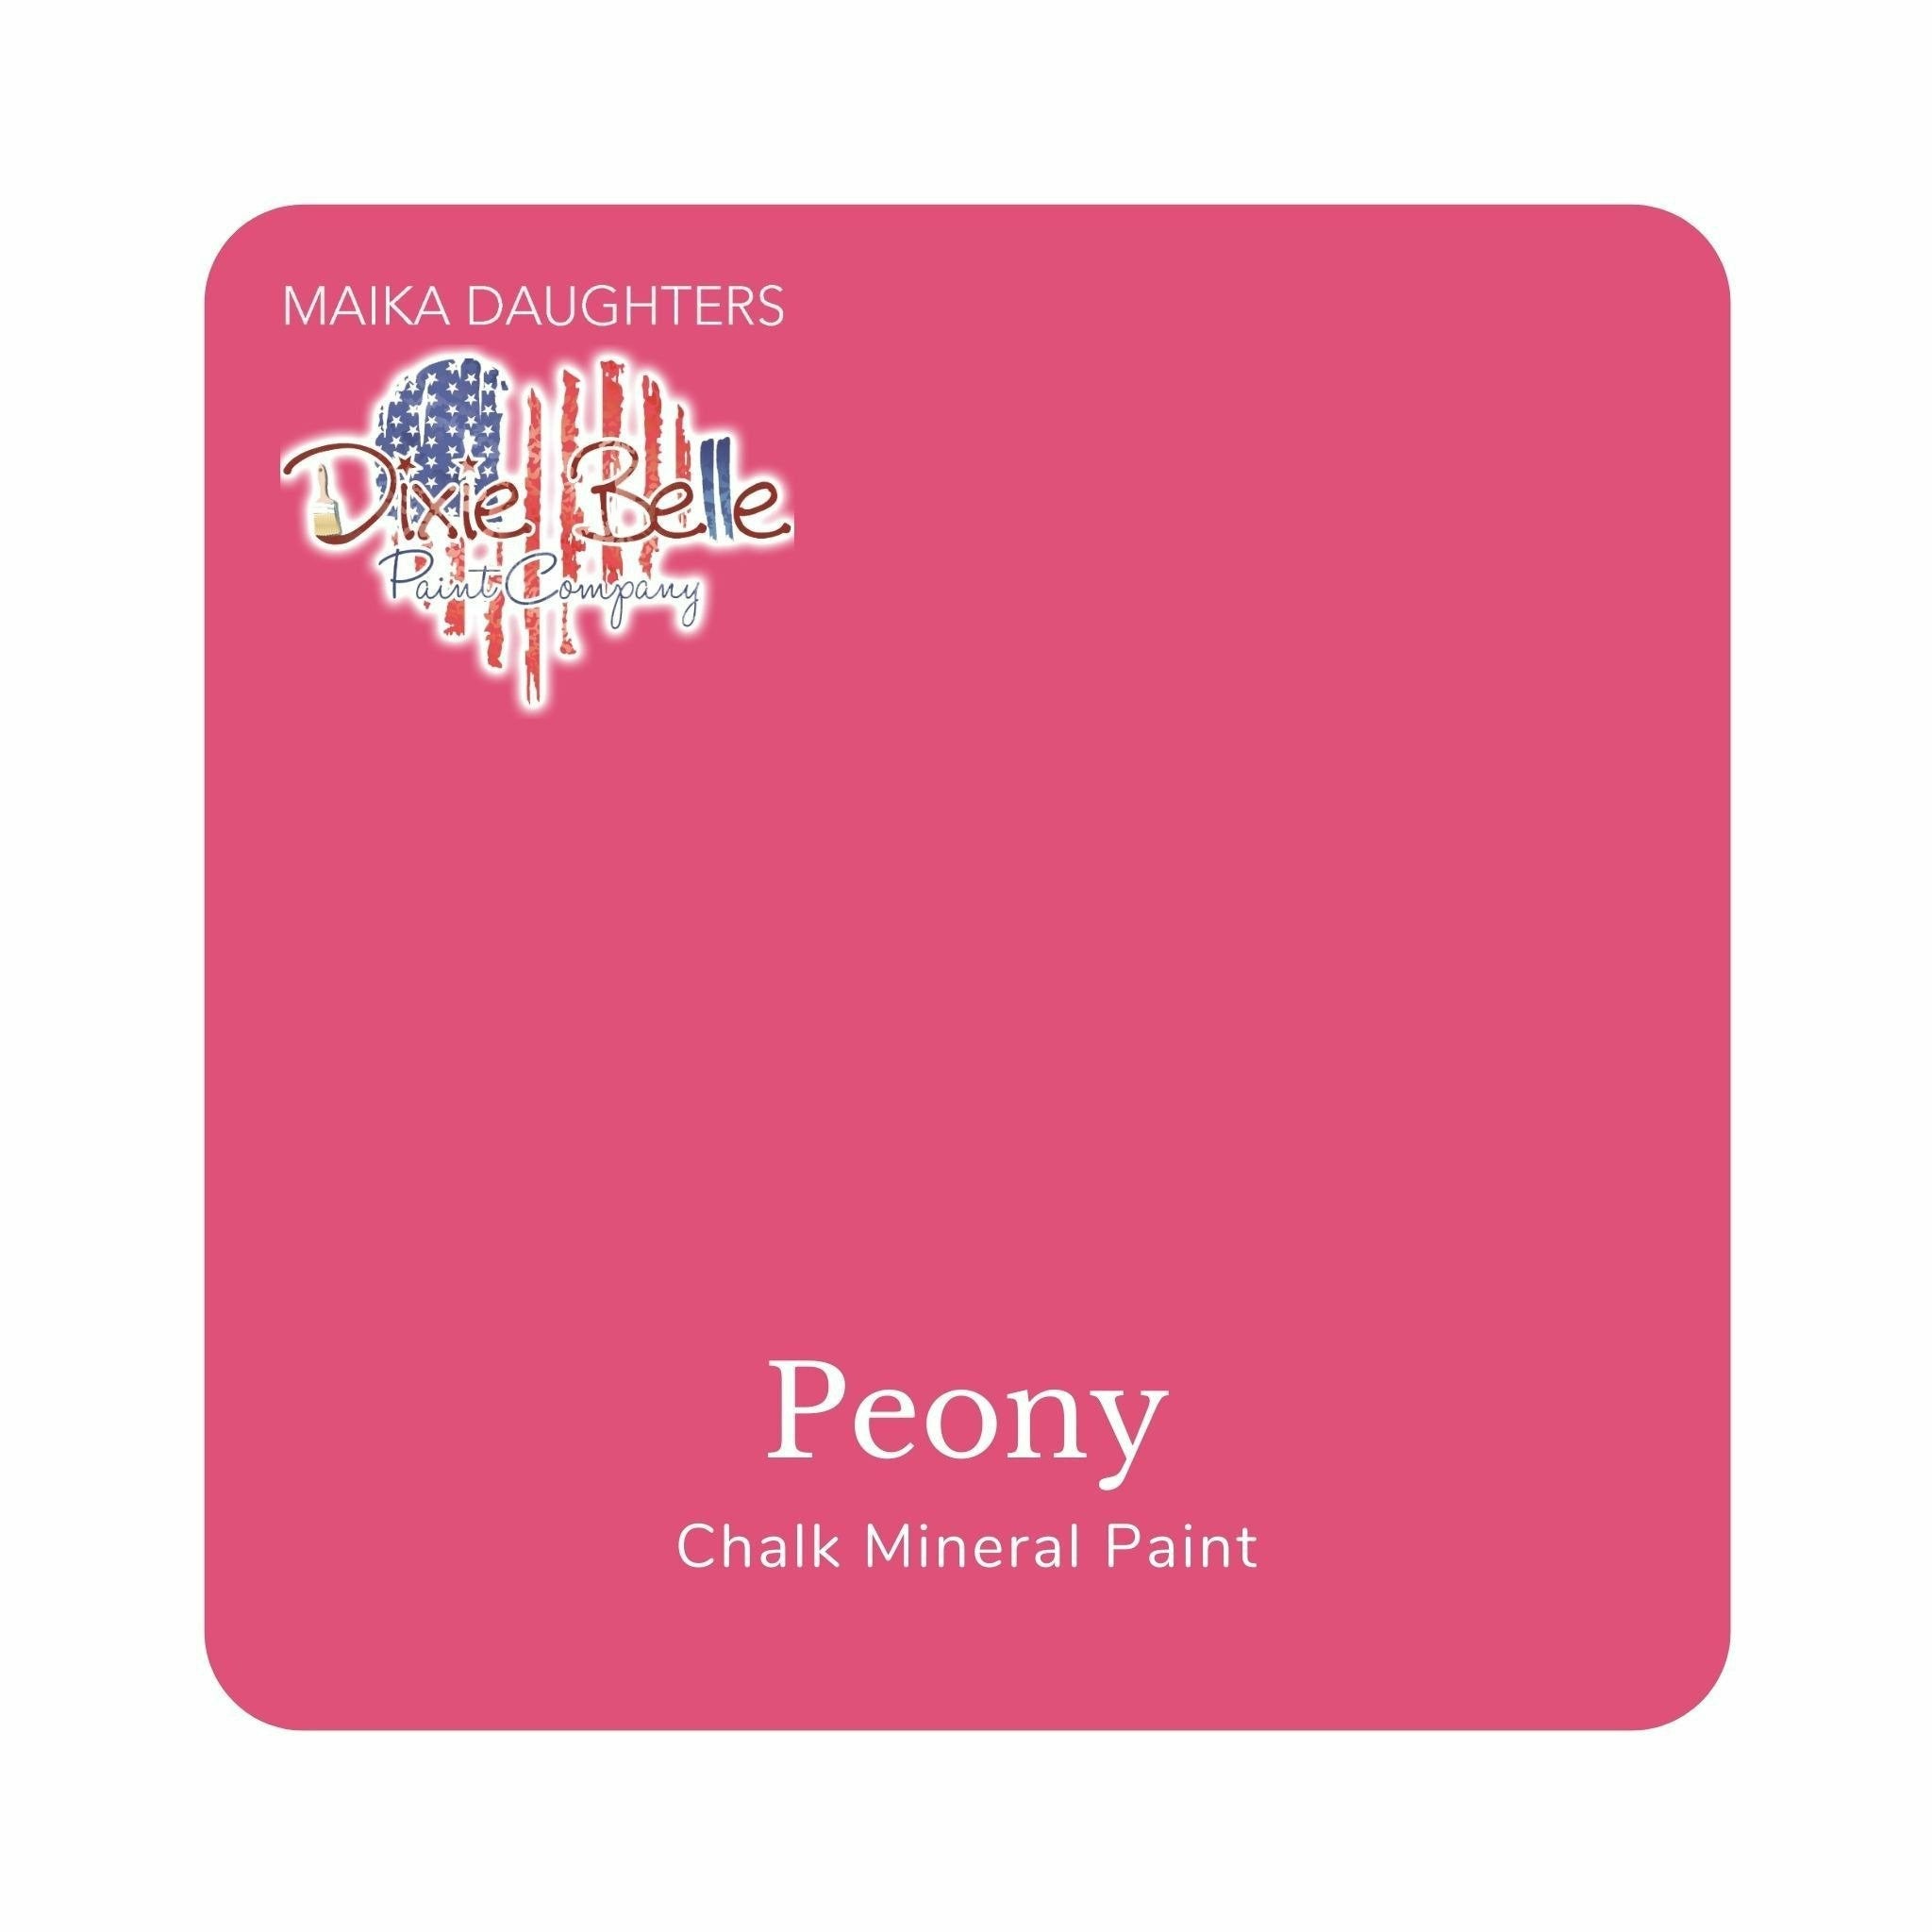 A square swatch card of Dixie Belle Paint Company’s Peony Chalk Mineral Paint is against a white background. This color is a vivid pink.